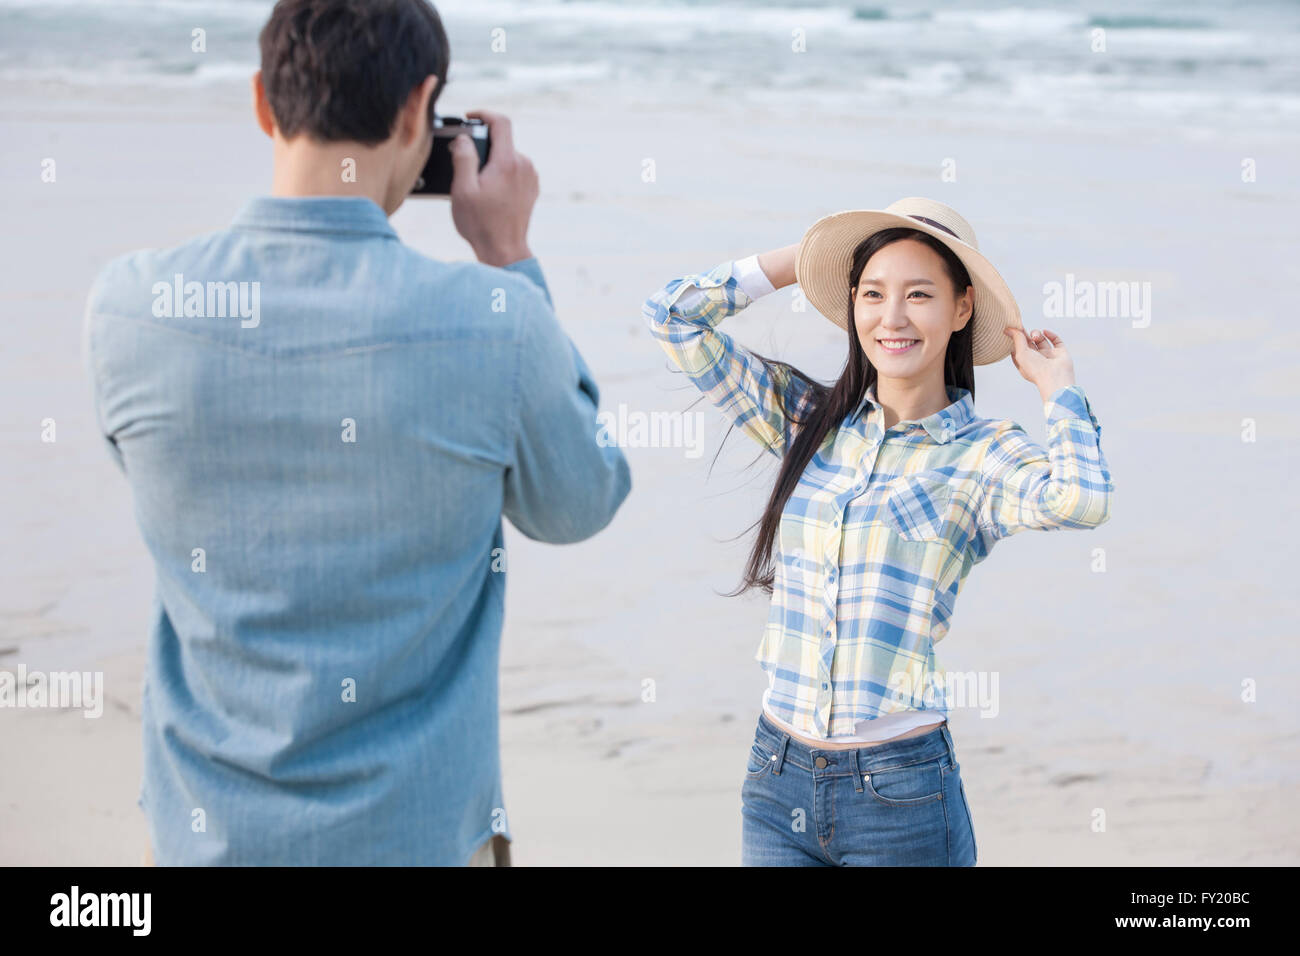 Man taking a picture of his girlfriend at the beach Stock Photo